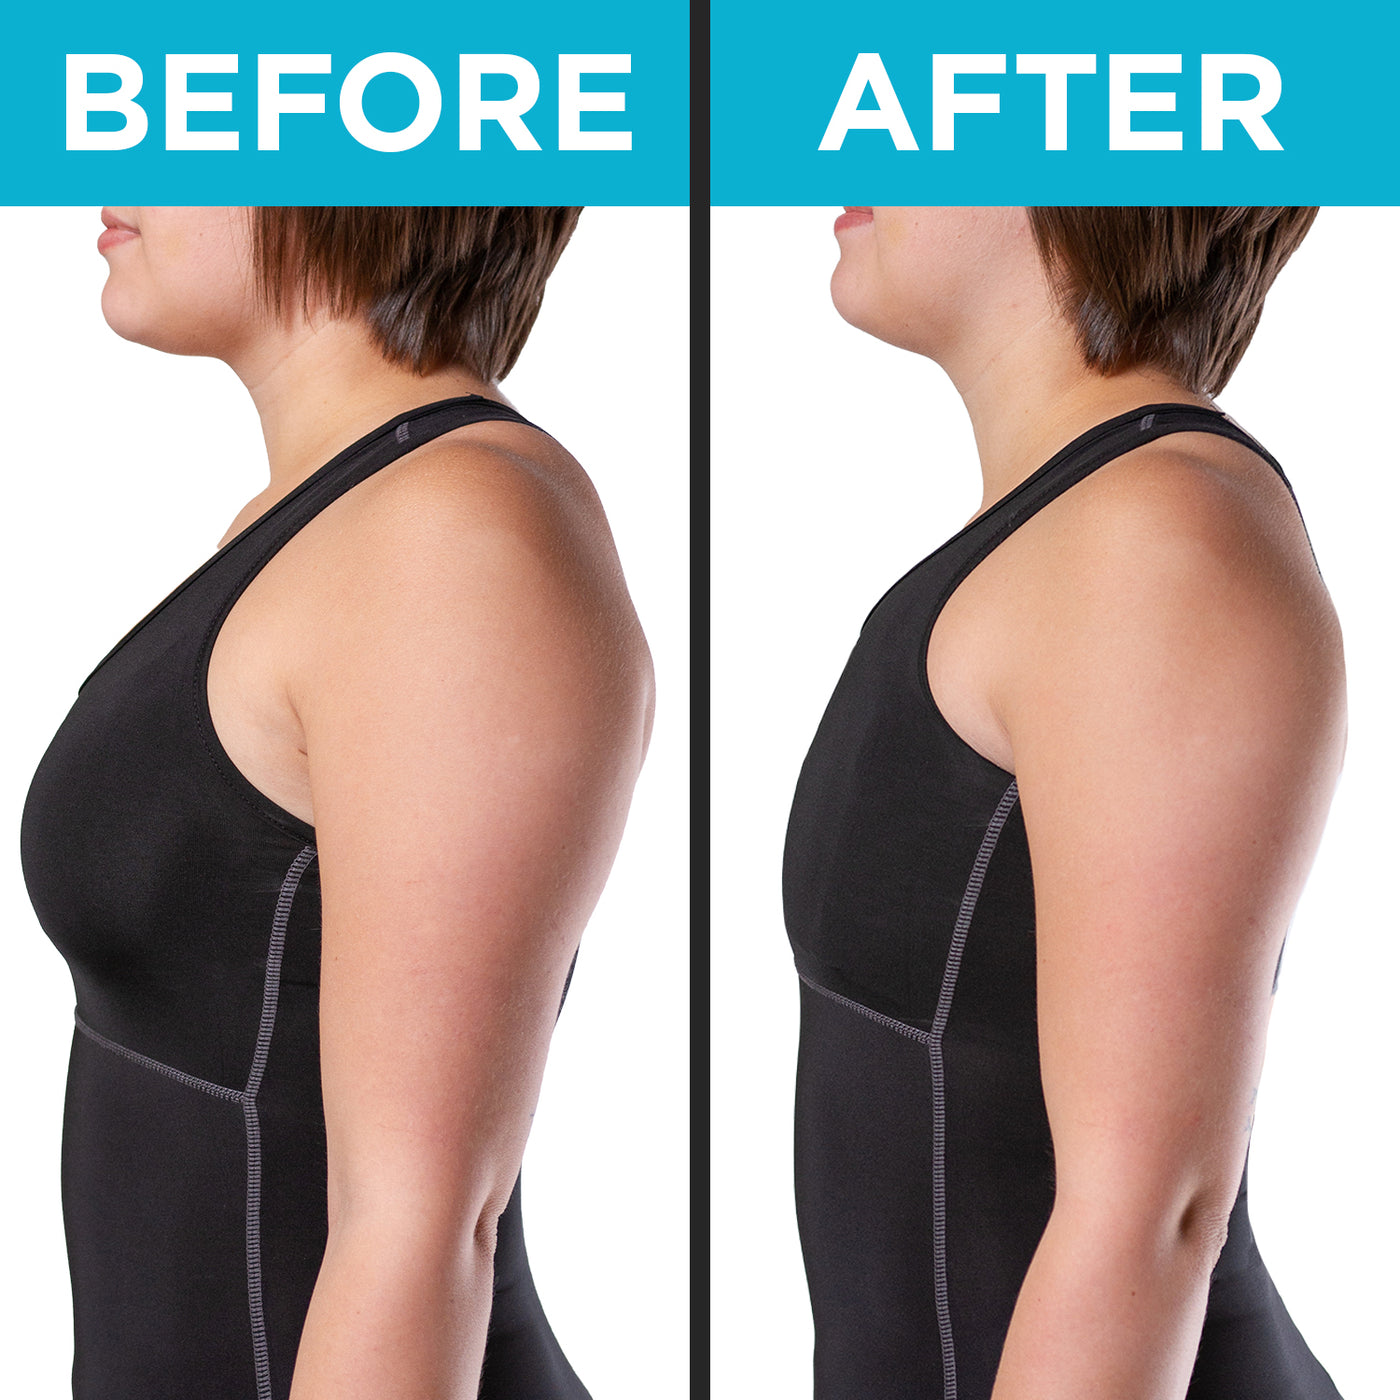 our chest compression wrap can reduce breast appearance by two cup sizes